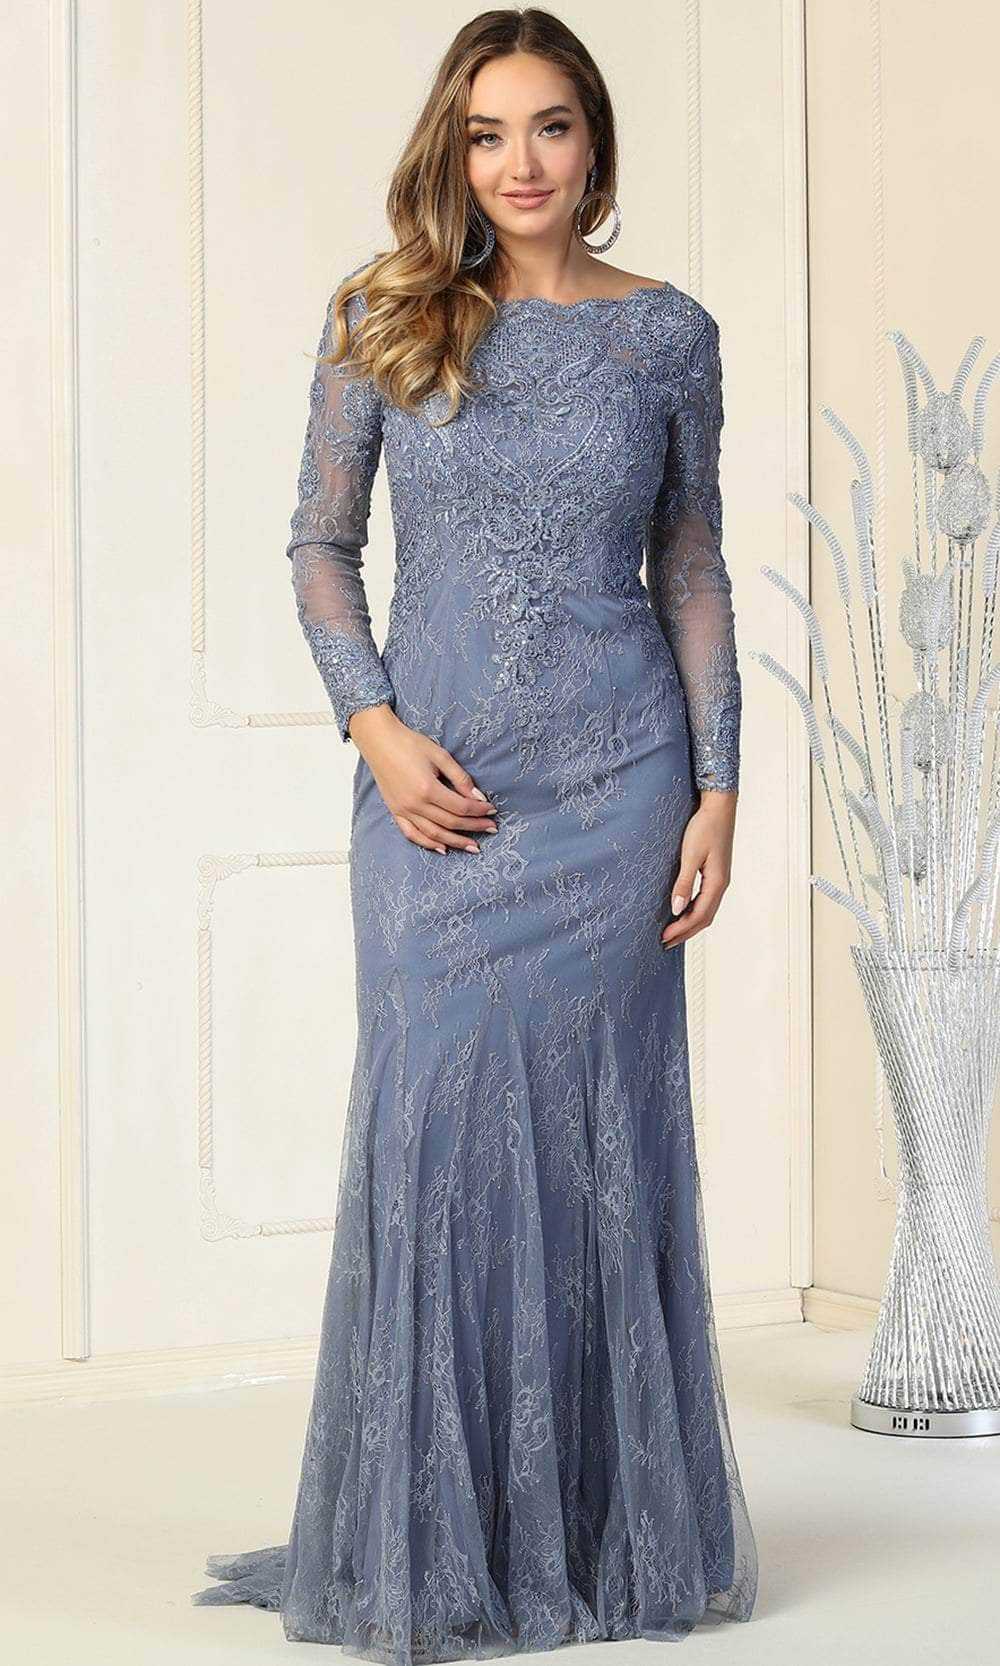 May Queen, May Queen RQ7906 - Laced Scalloped Bateau Neckline Evening Dress